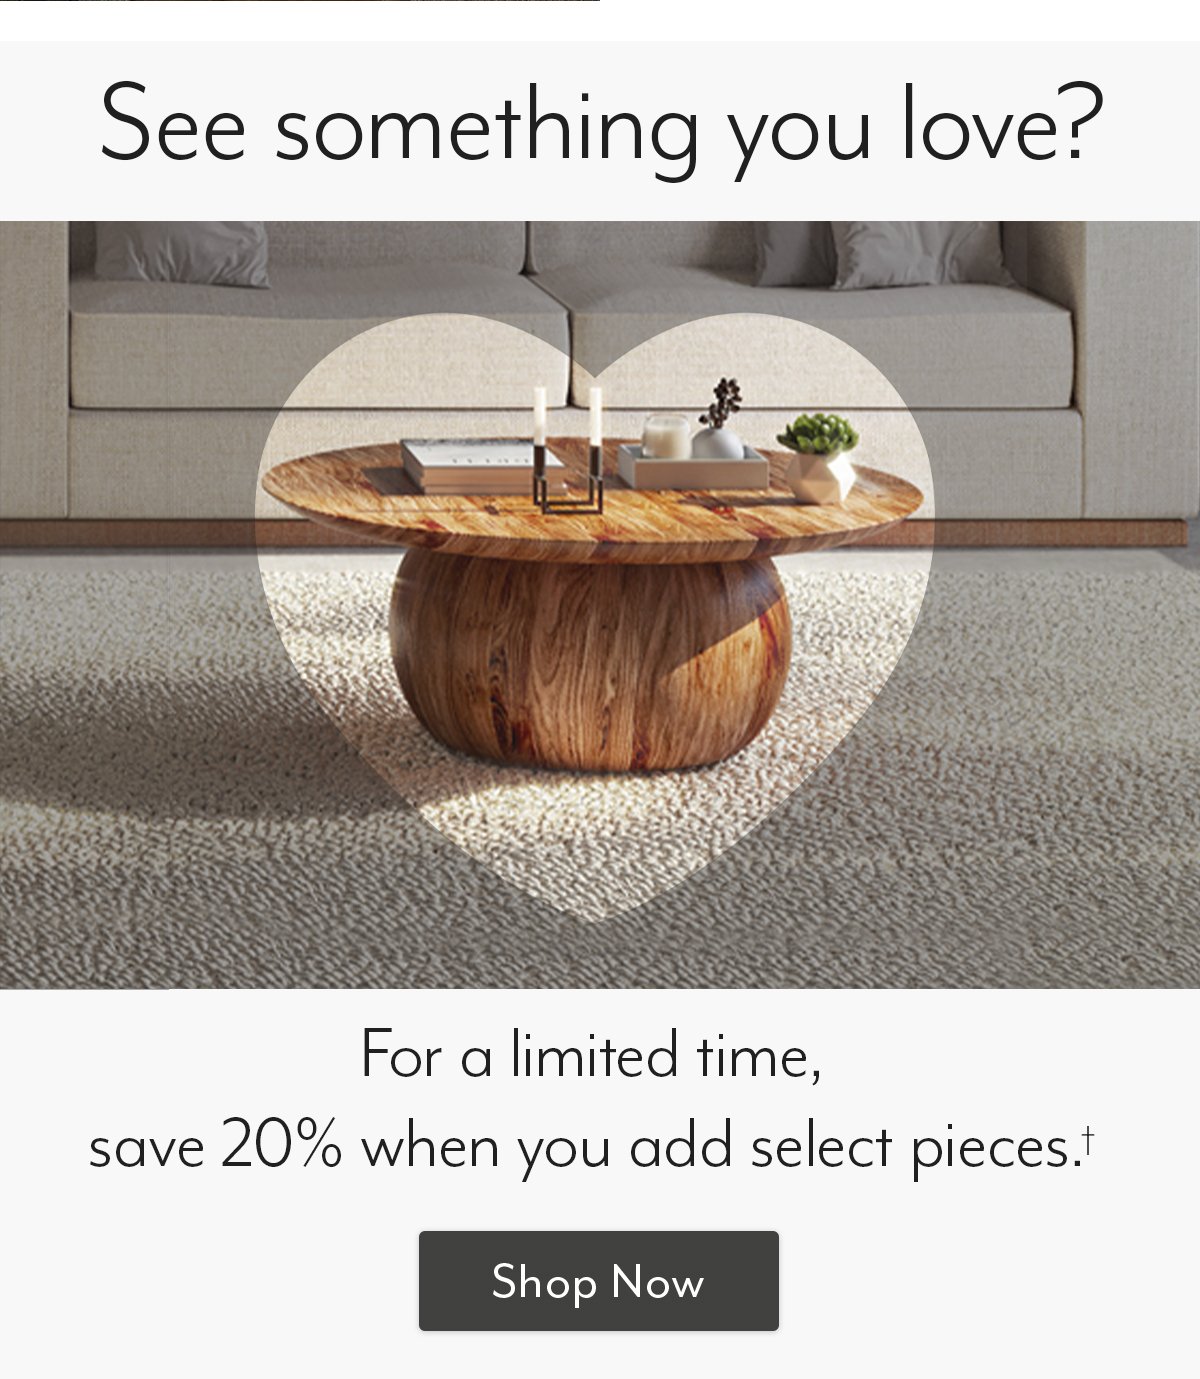 Save 20% when you add select pieces